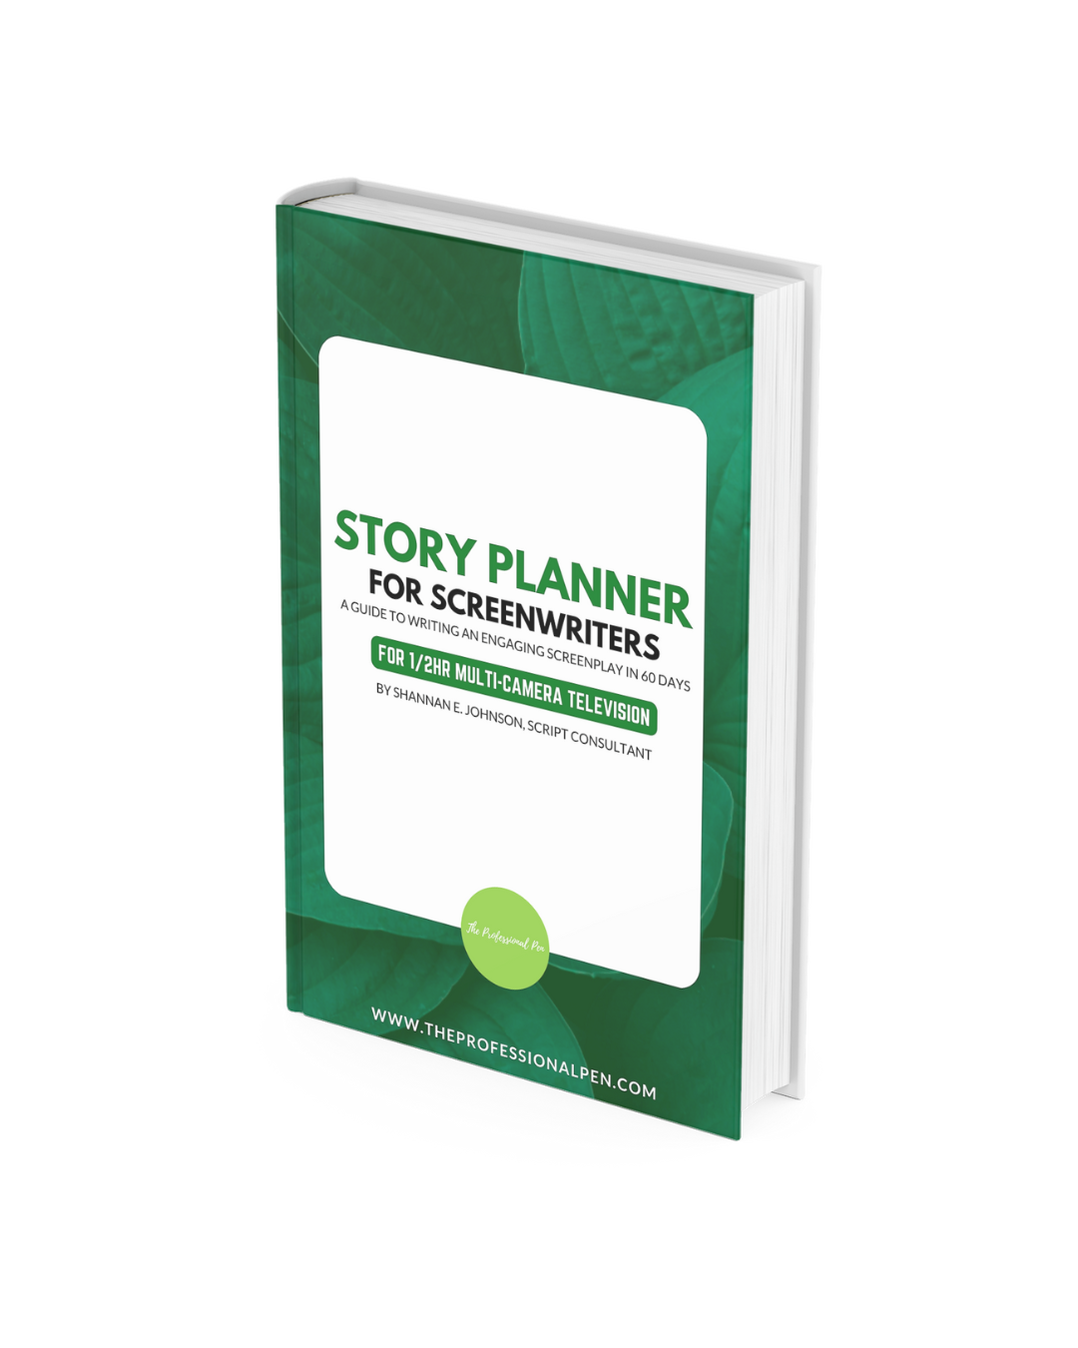 Story Planner for 1/2hr Multi-Camera TV Shows The Professional Pen